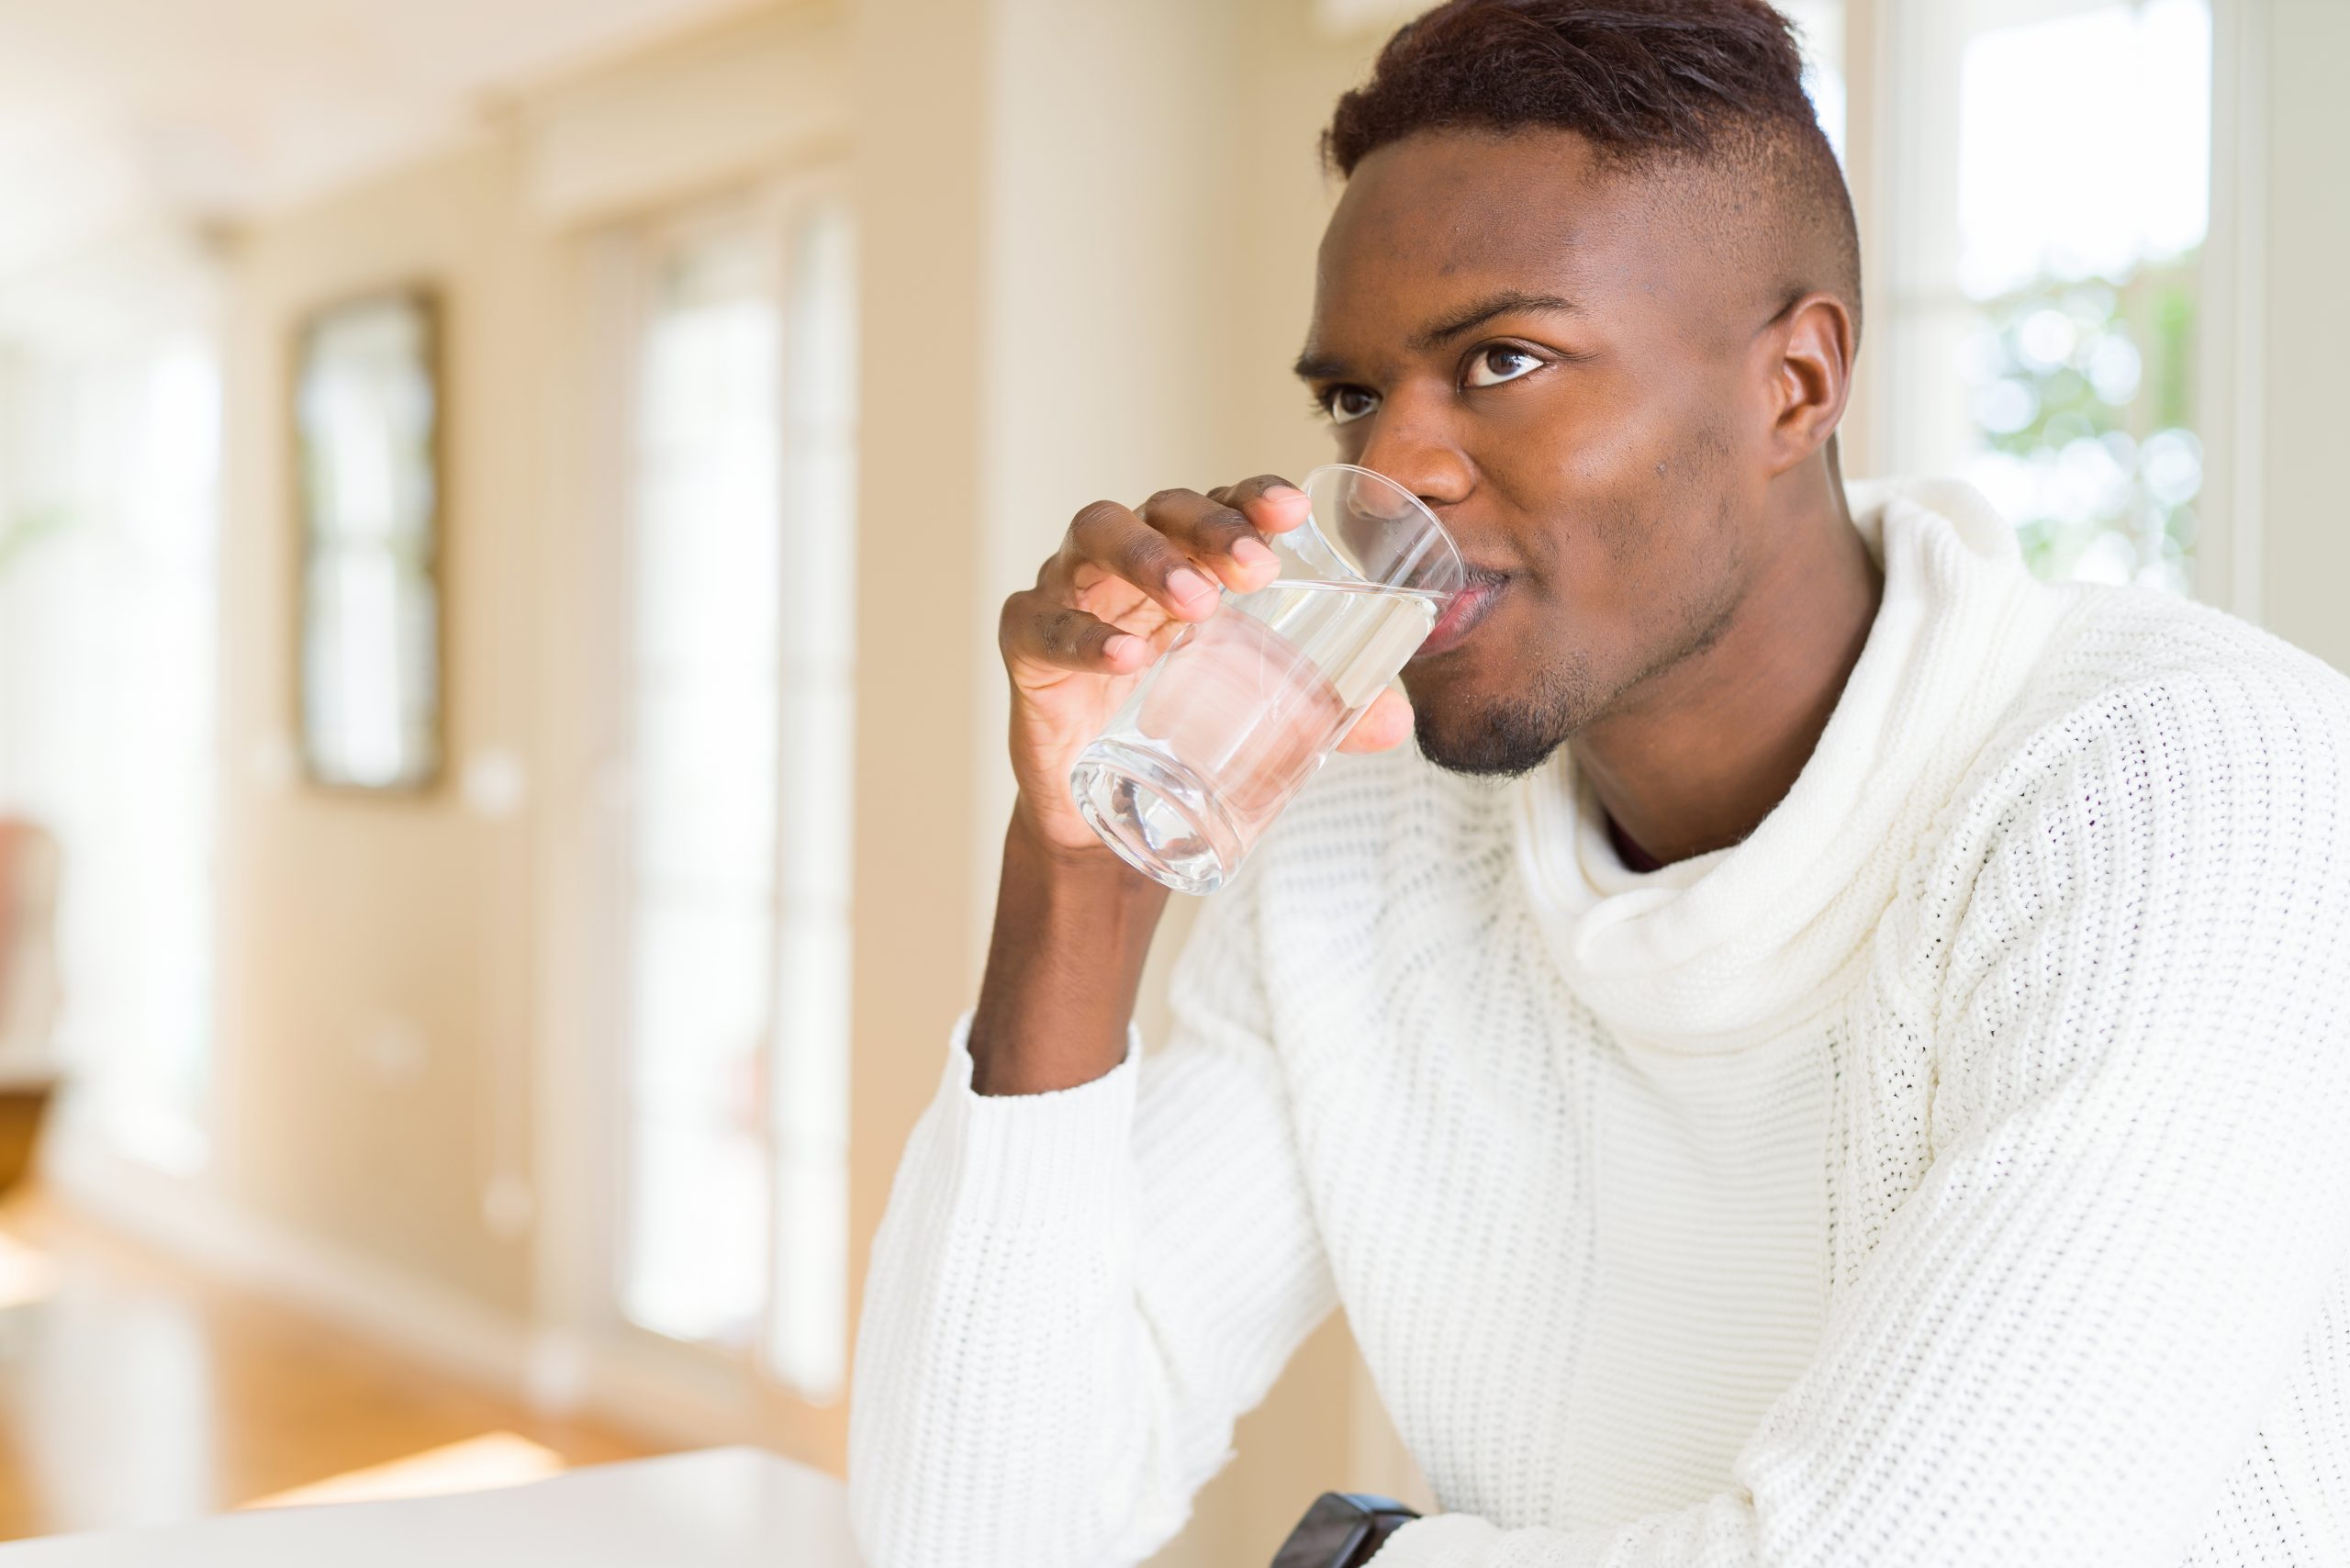 Drinking water to prevent dehydration